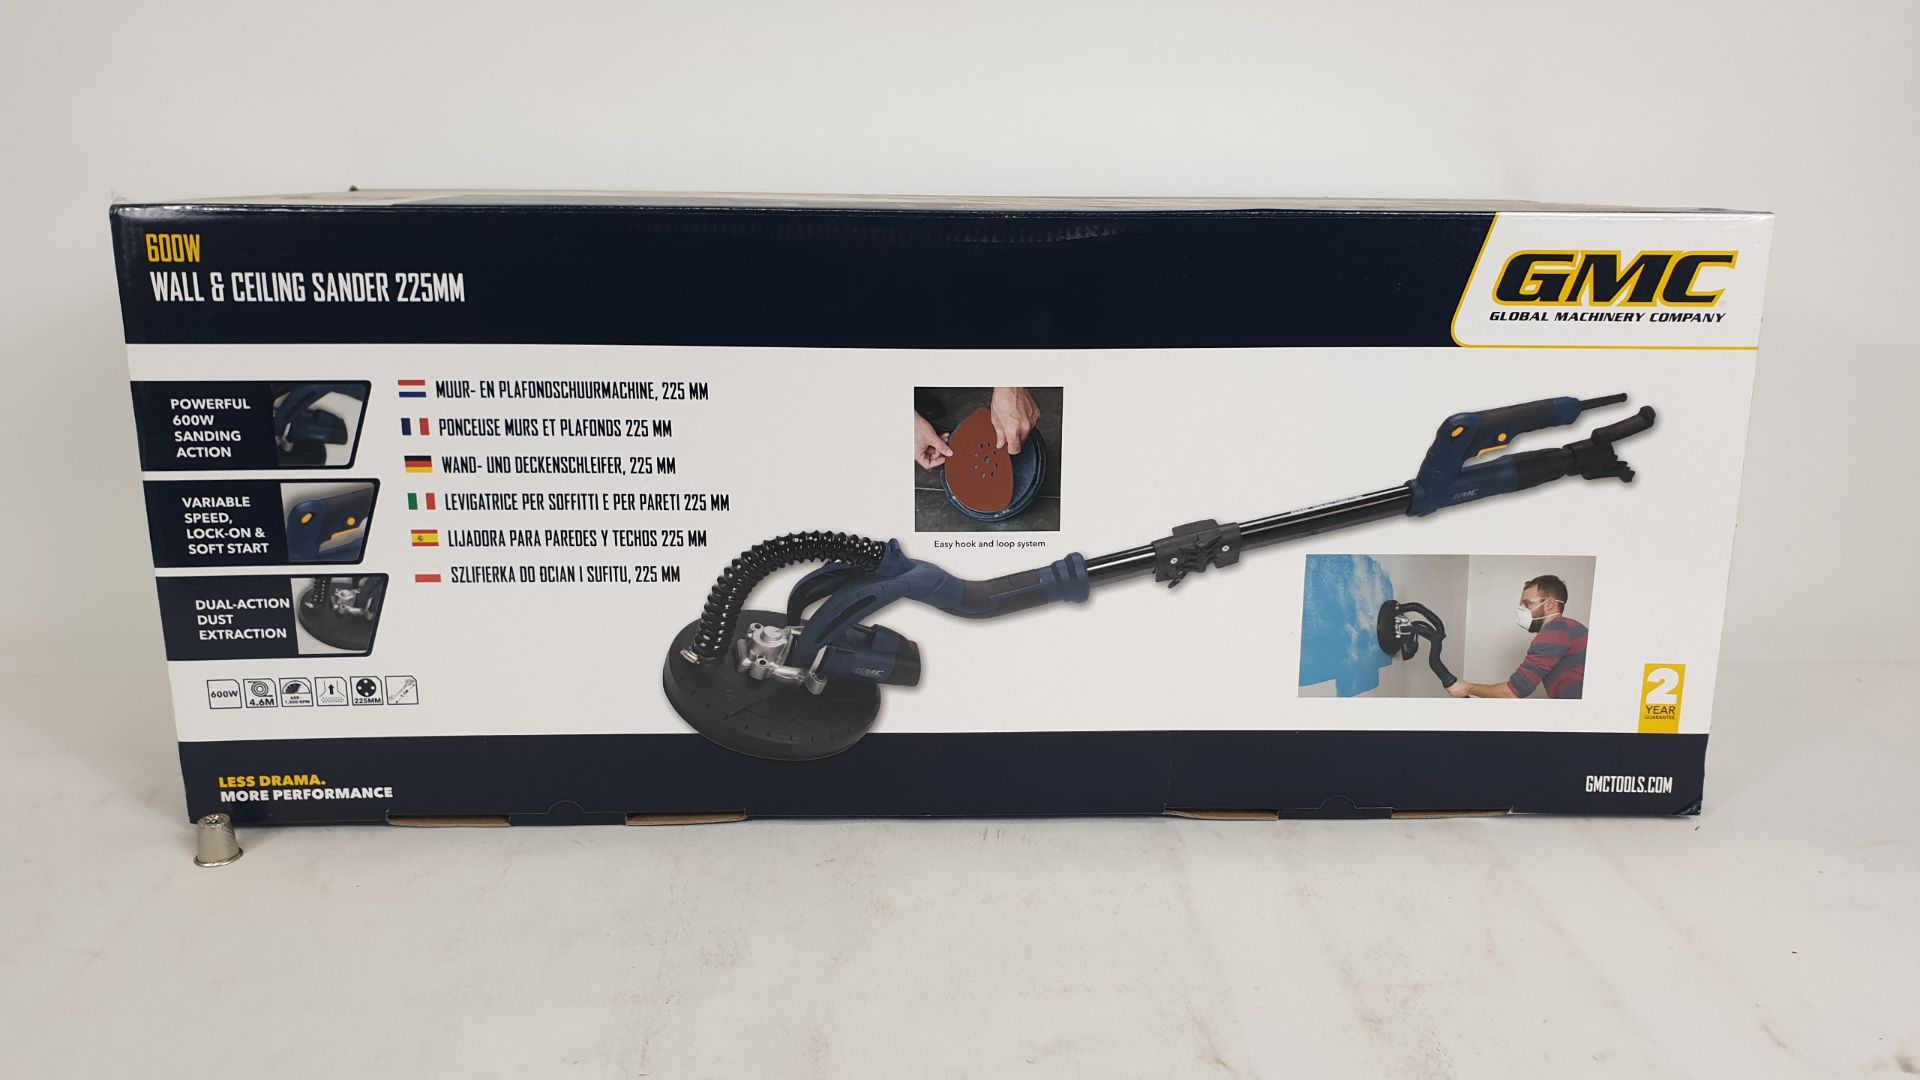 (LOT FOR THURSDAY 28TH MAY AUCTION) GMC 600W WALL AND CEILING SANDER 225M (PRODUCT CODE 264803) - (